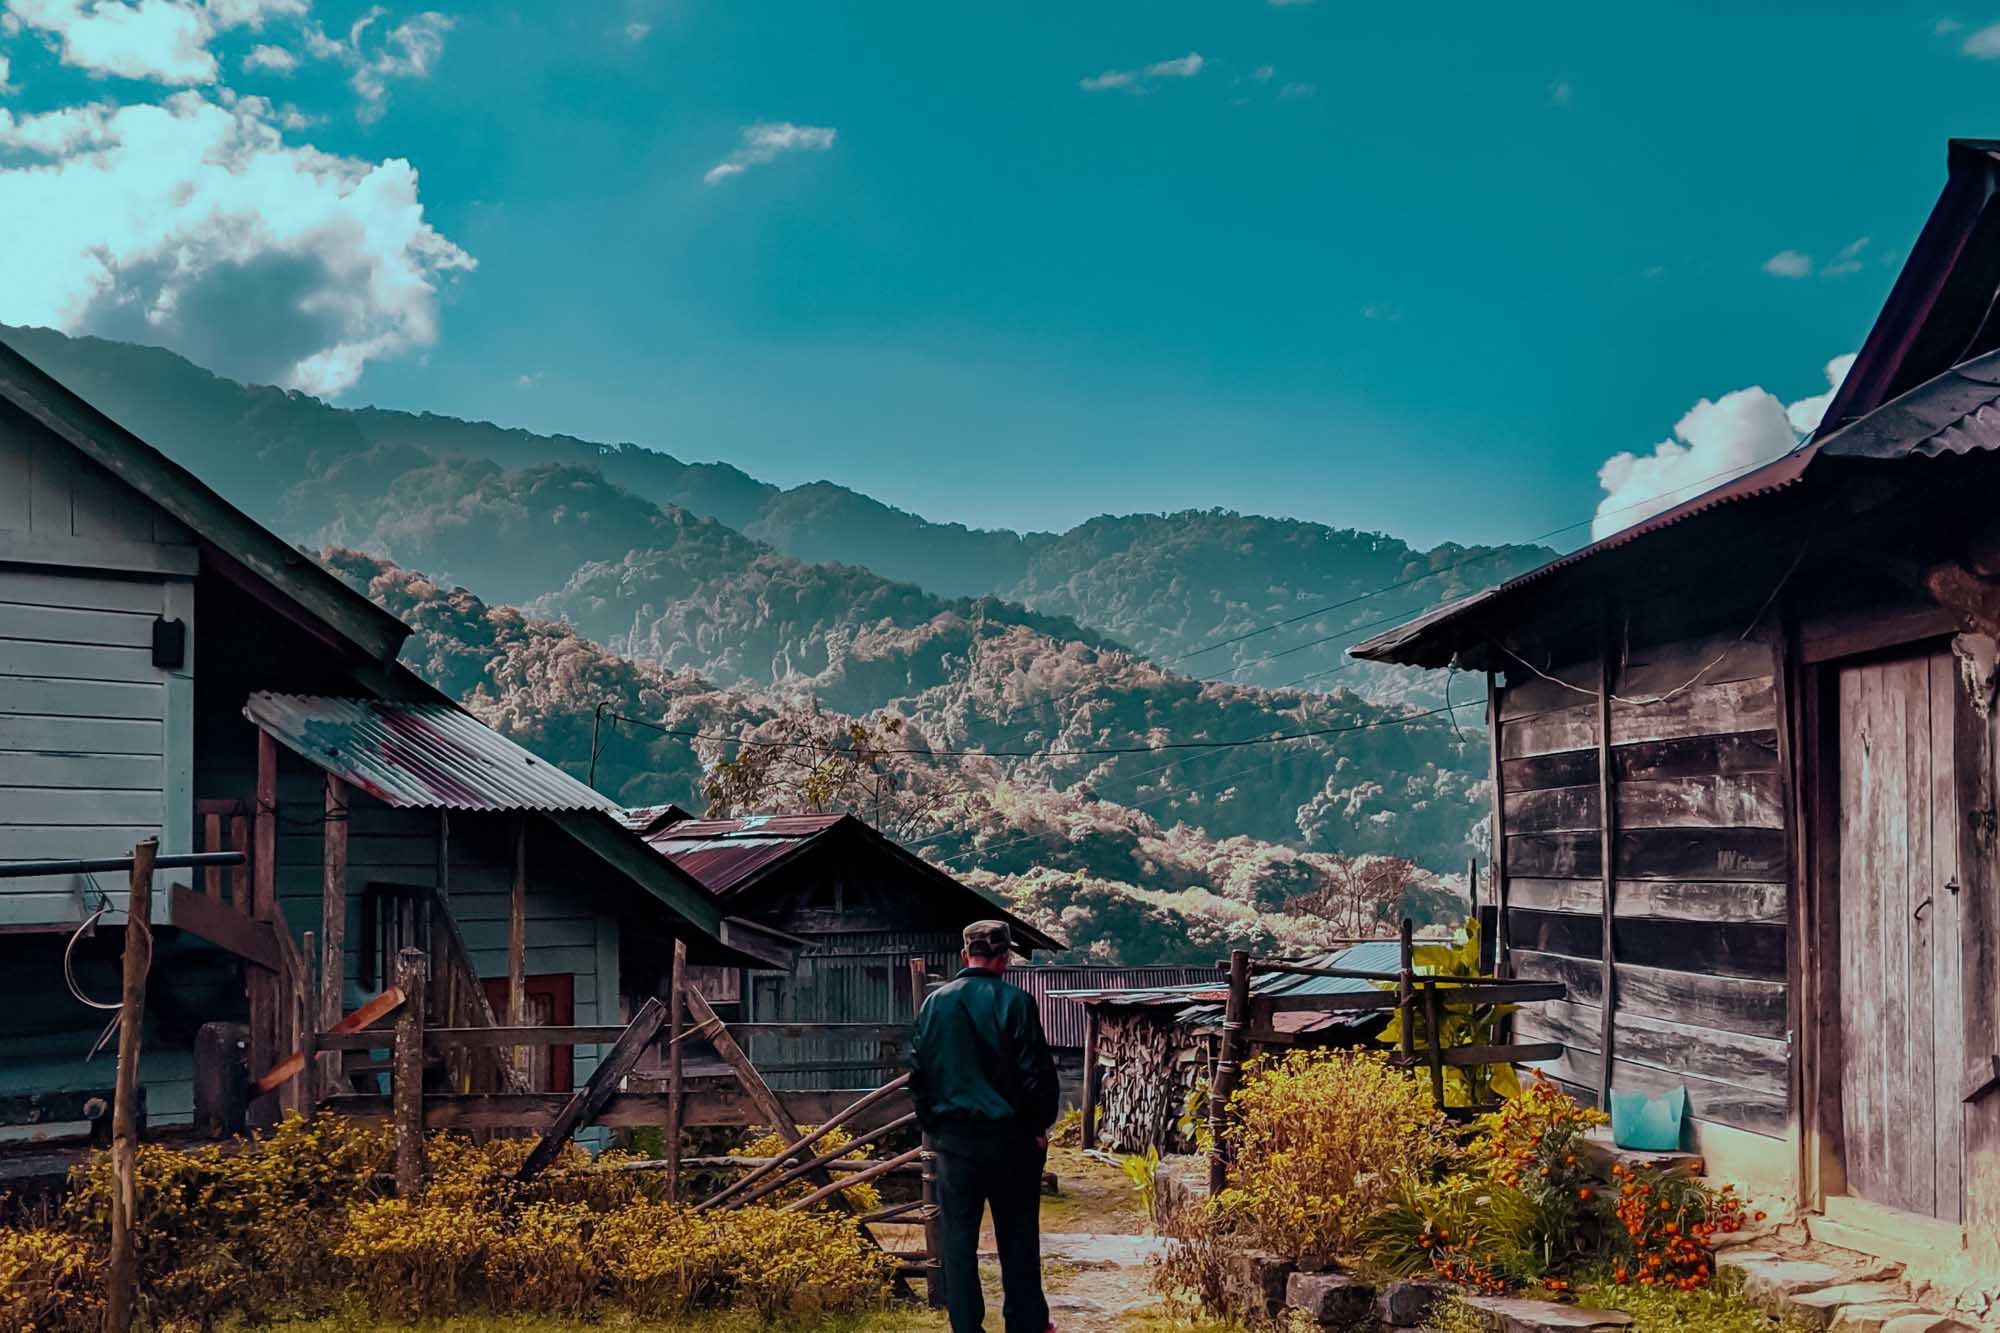 Reasons Why You Should Visit Nagaland,Why You Should Visit Nagaland,You Should Visit Nagaland,Vibrant Tribal Culture,Naga Heritage Village,Valley of Flowers,Unique Handicrafts and Art,Kohima War Cemetery,Authentic Traditional Festivals,11 Reasons Why You Should Visit Nagaland